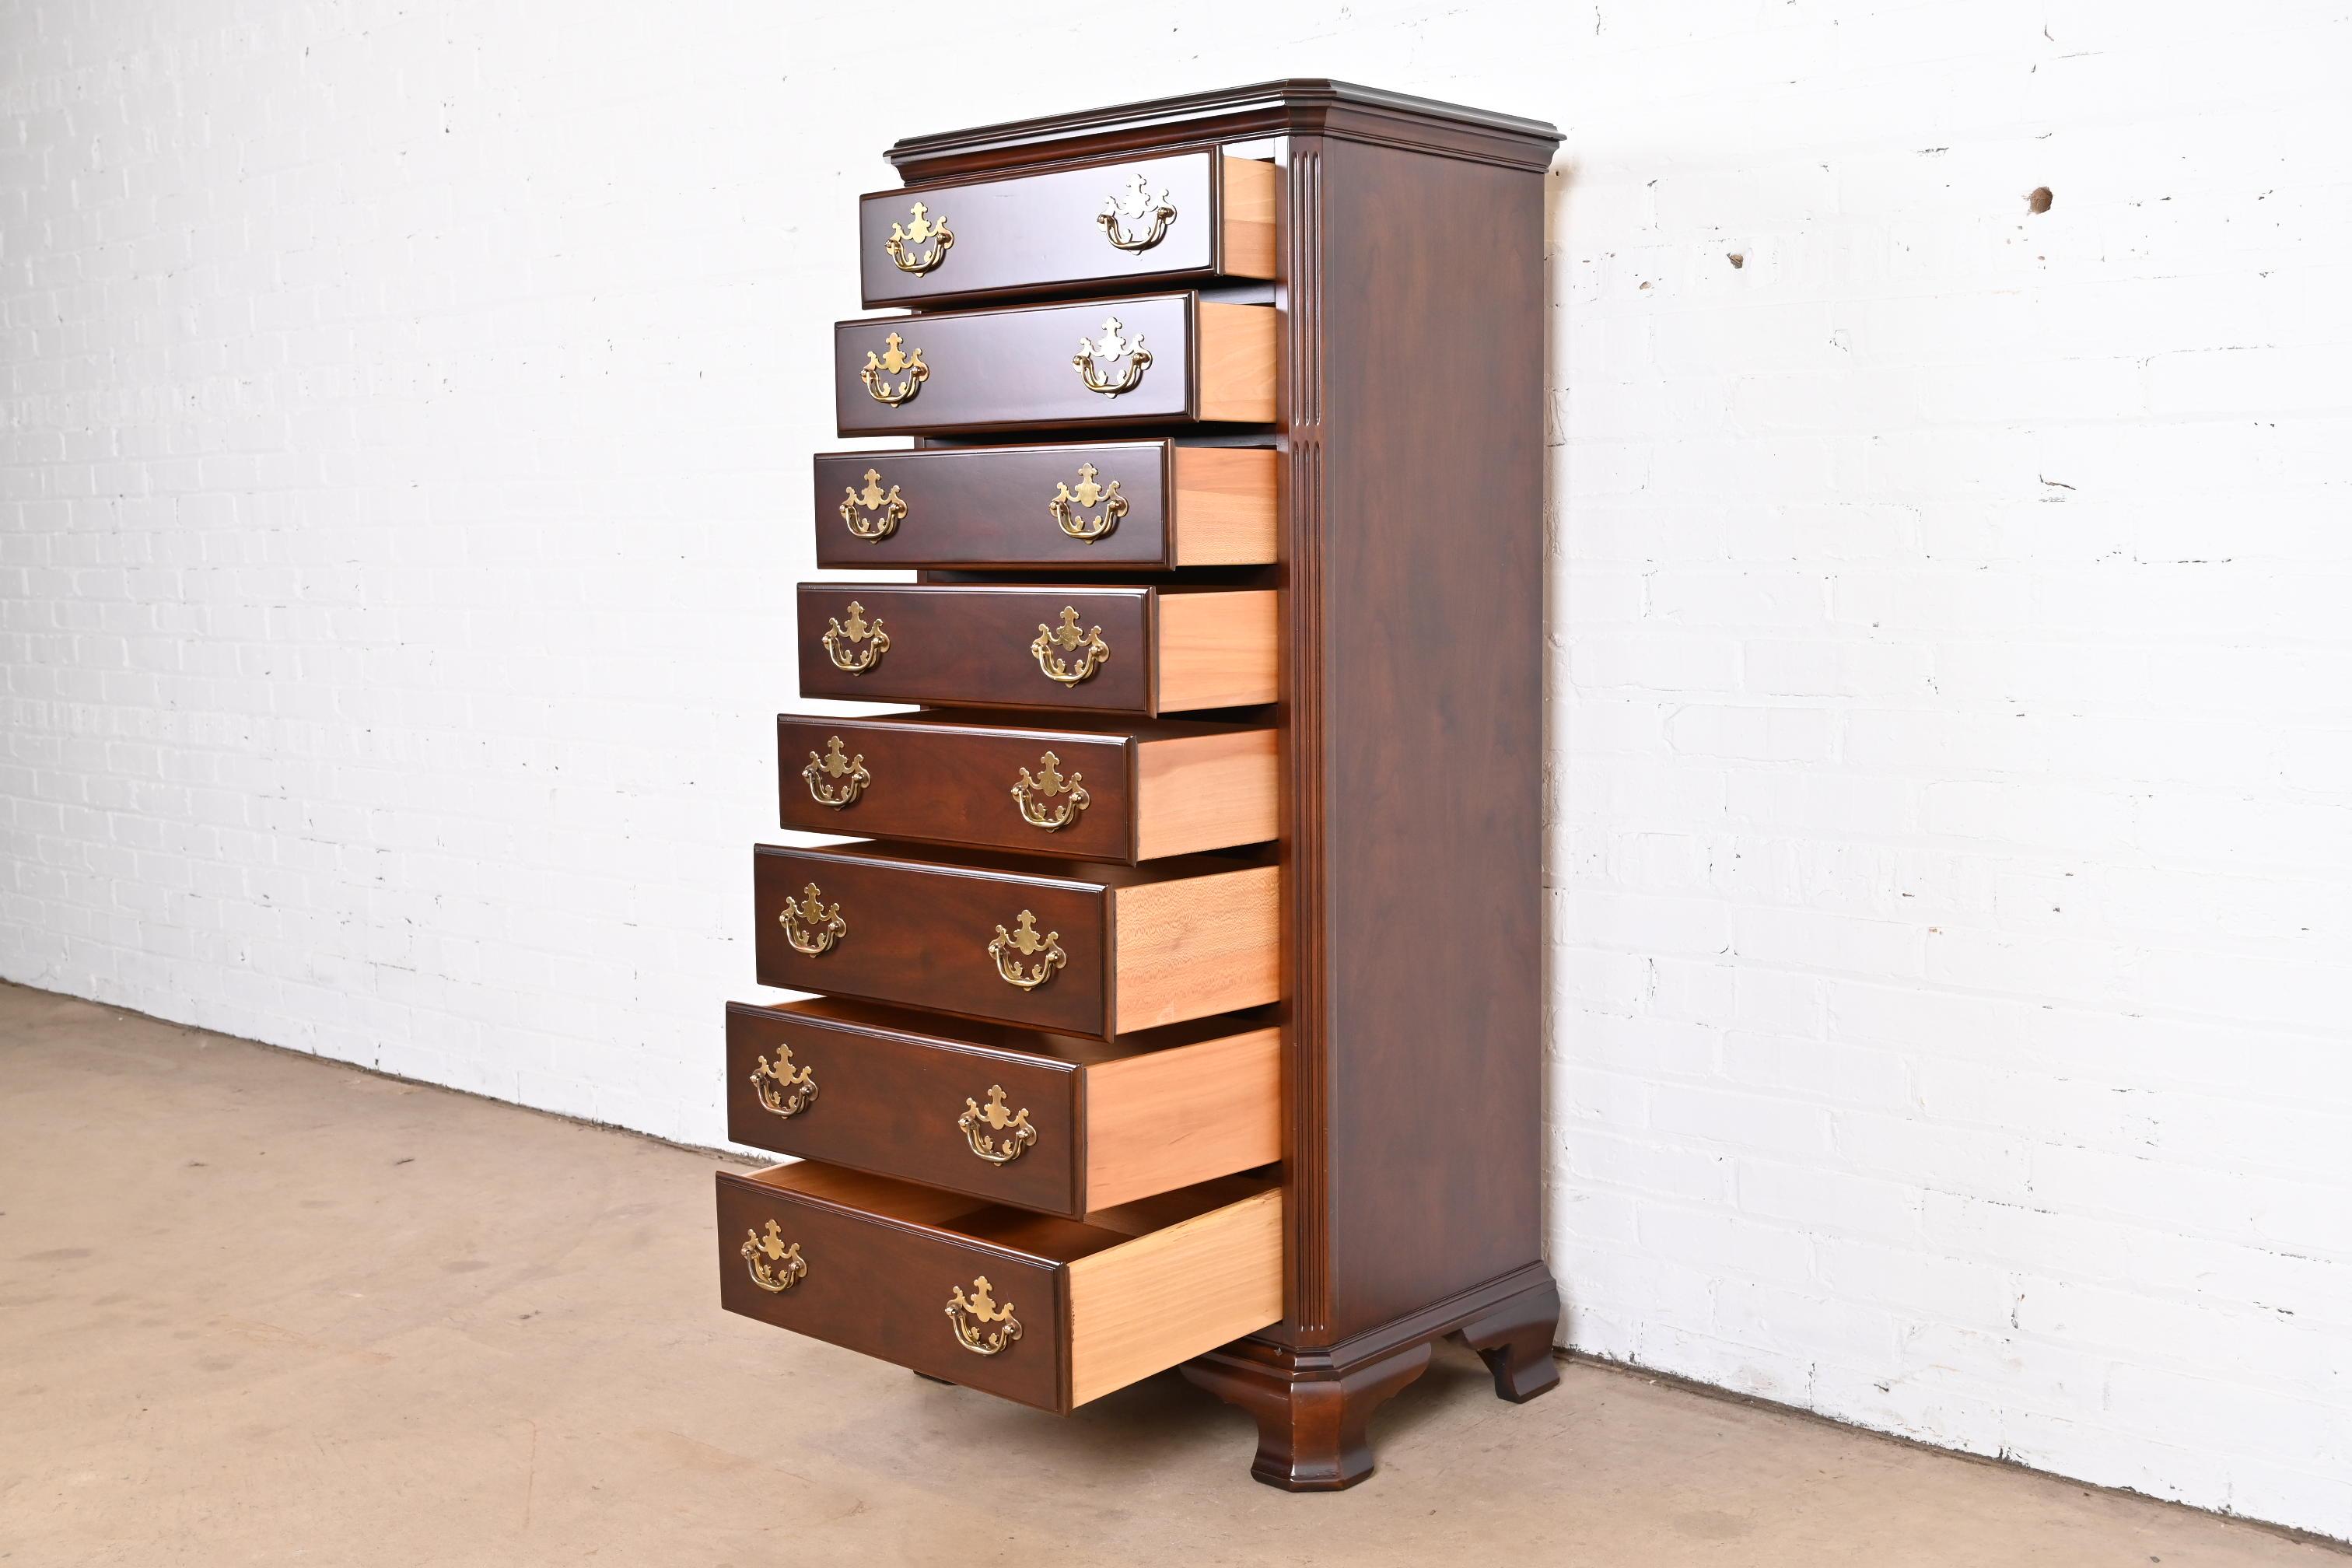 20th Century Drexel Heritage Georgian Solid Cherry Wood Lingerie Chest